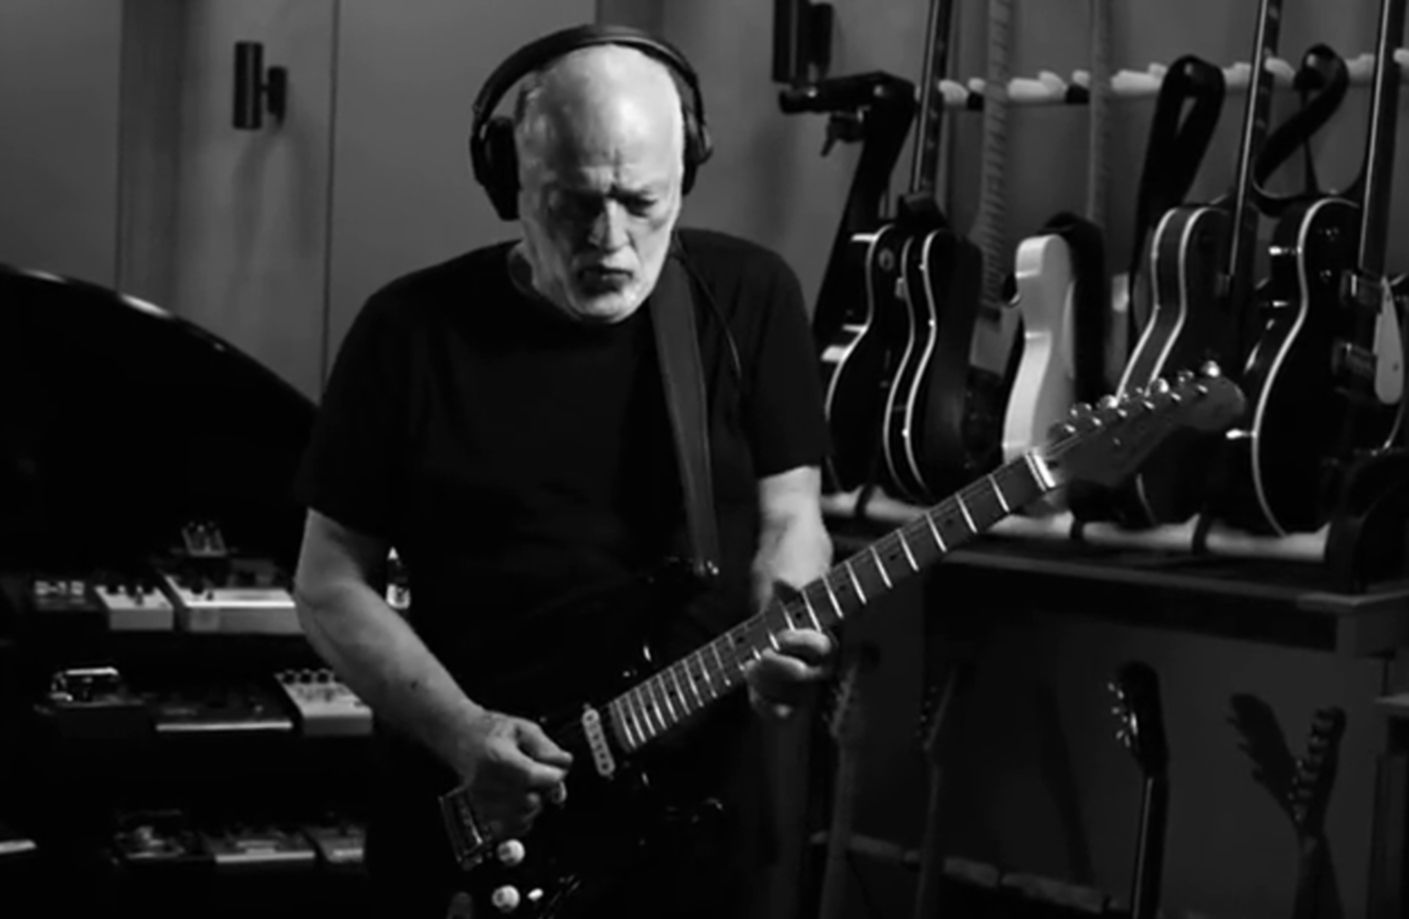 David Gilmour faces of stone video shot 2015